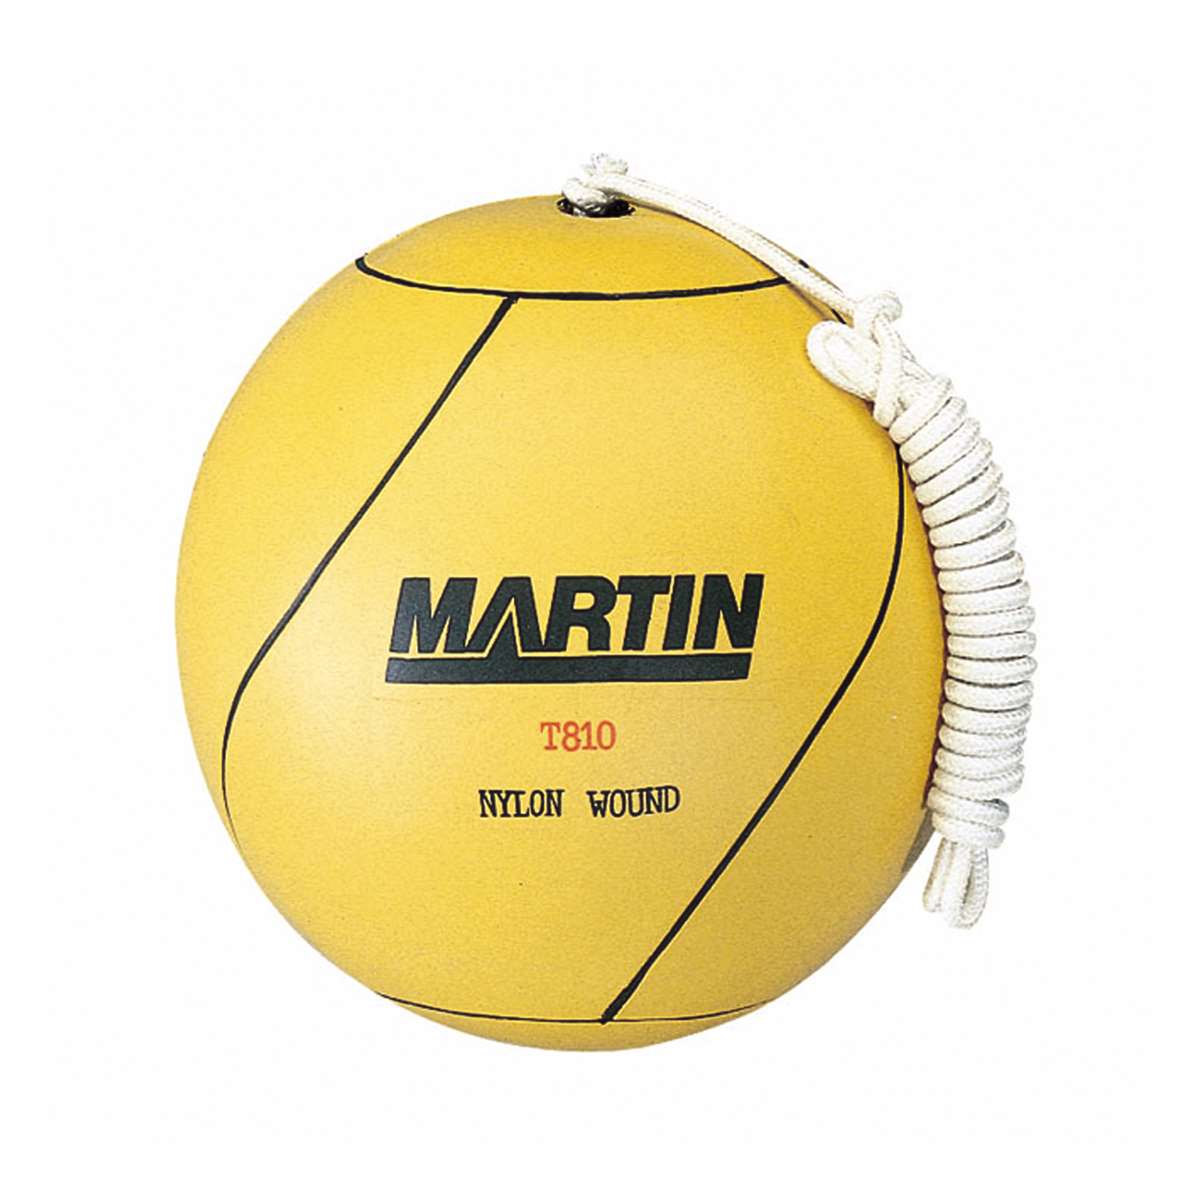 Tetherball Rubber Nylon Wound W/ Rope by Dick Martin Sports: Balls